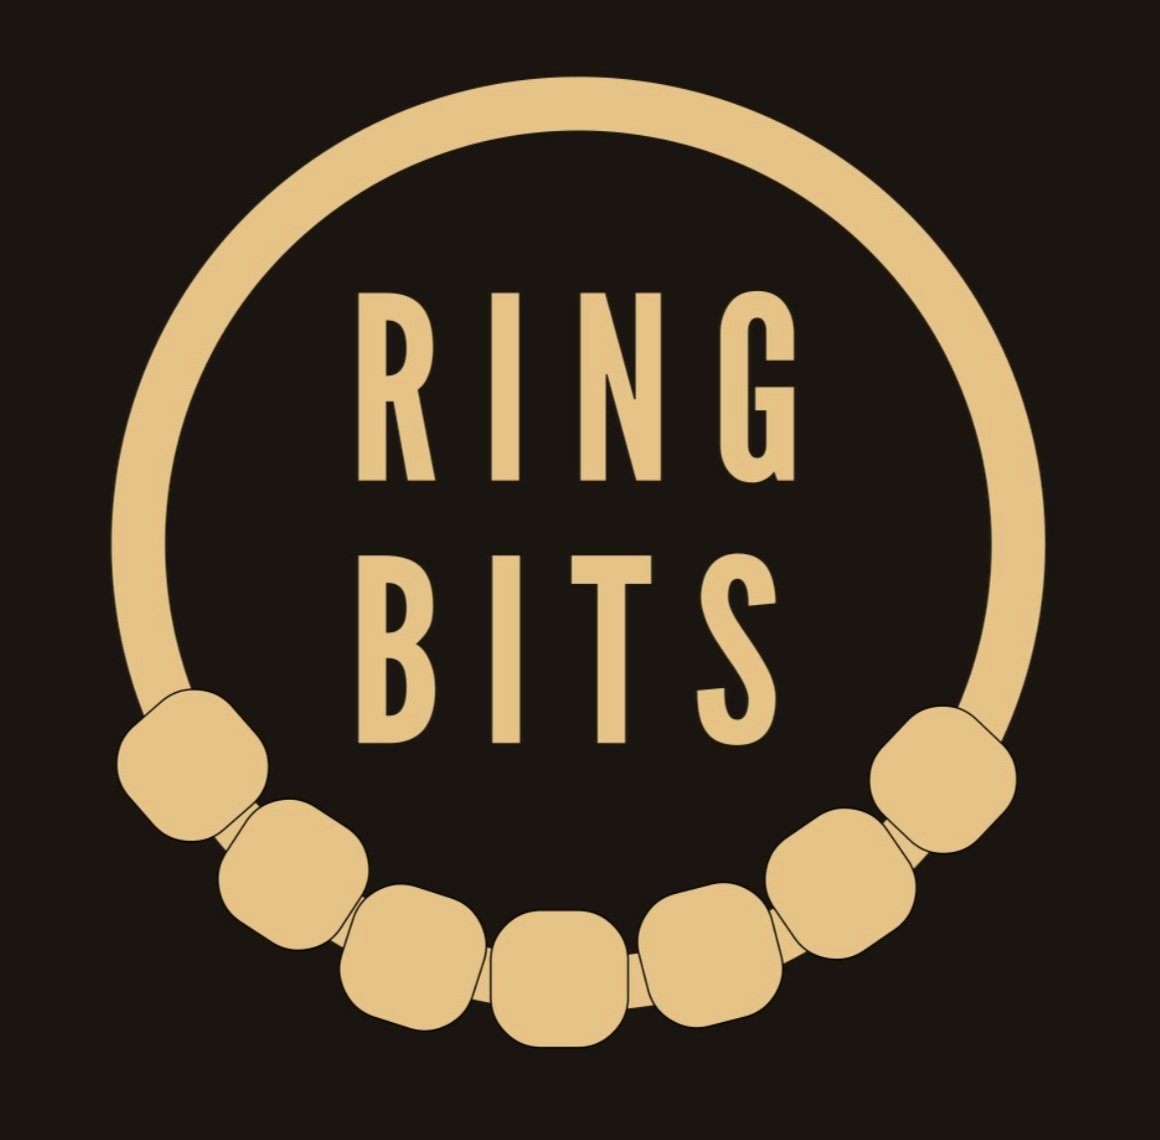 The Ring Bits